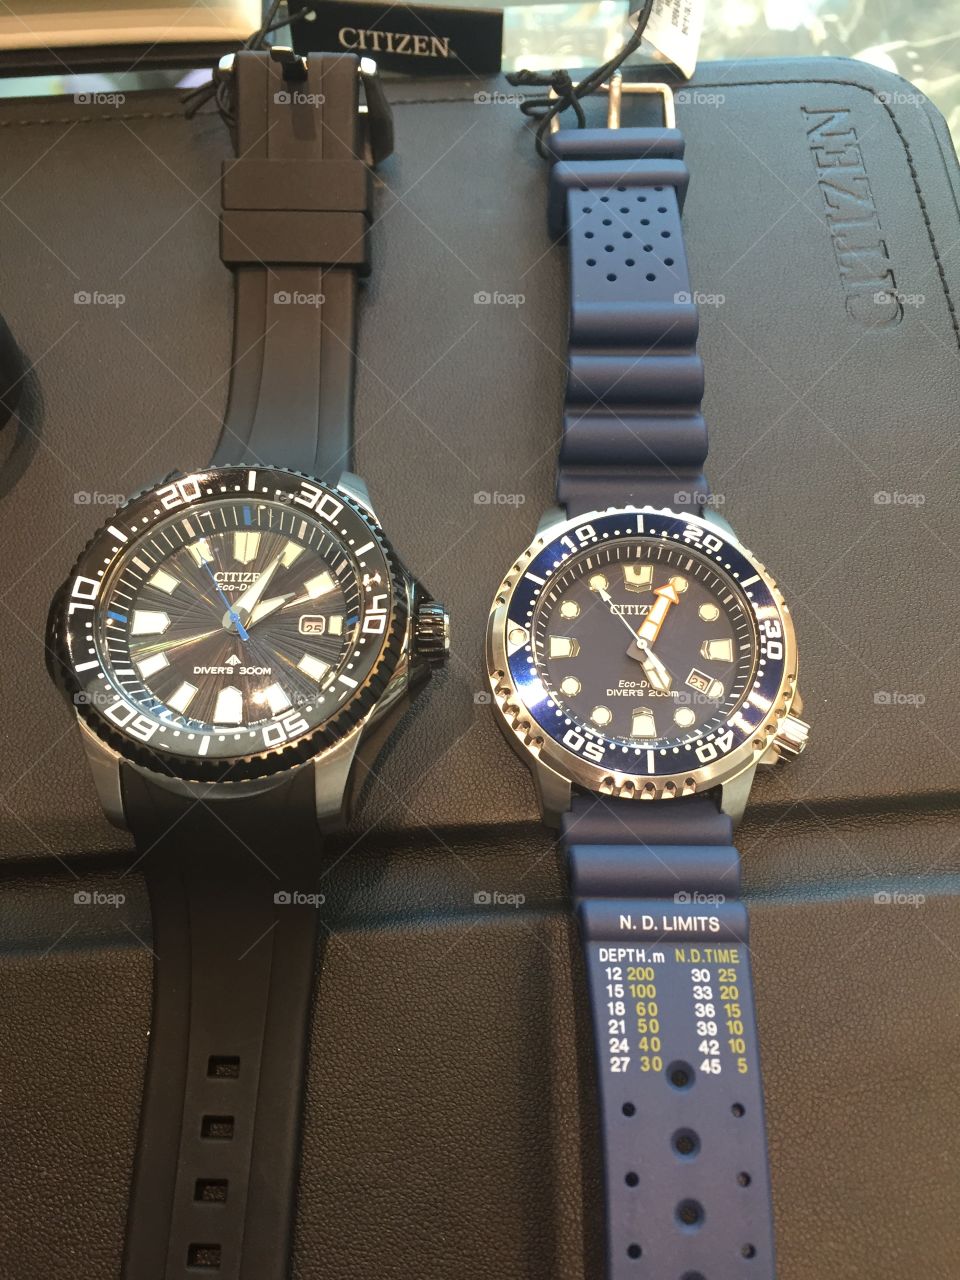 Diving watches